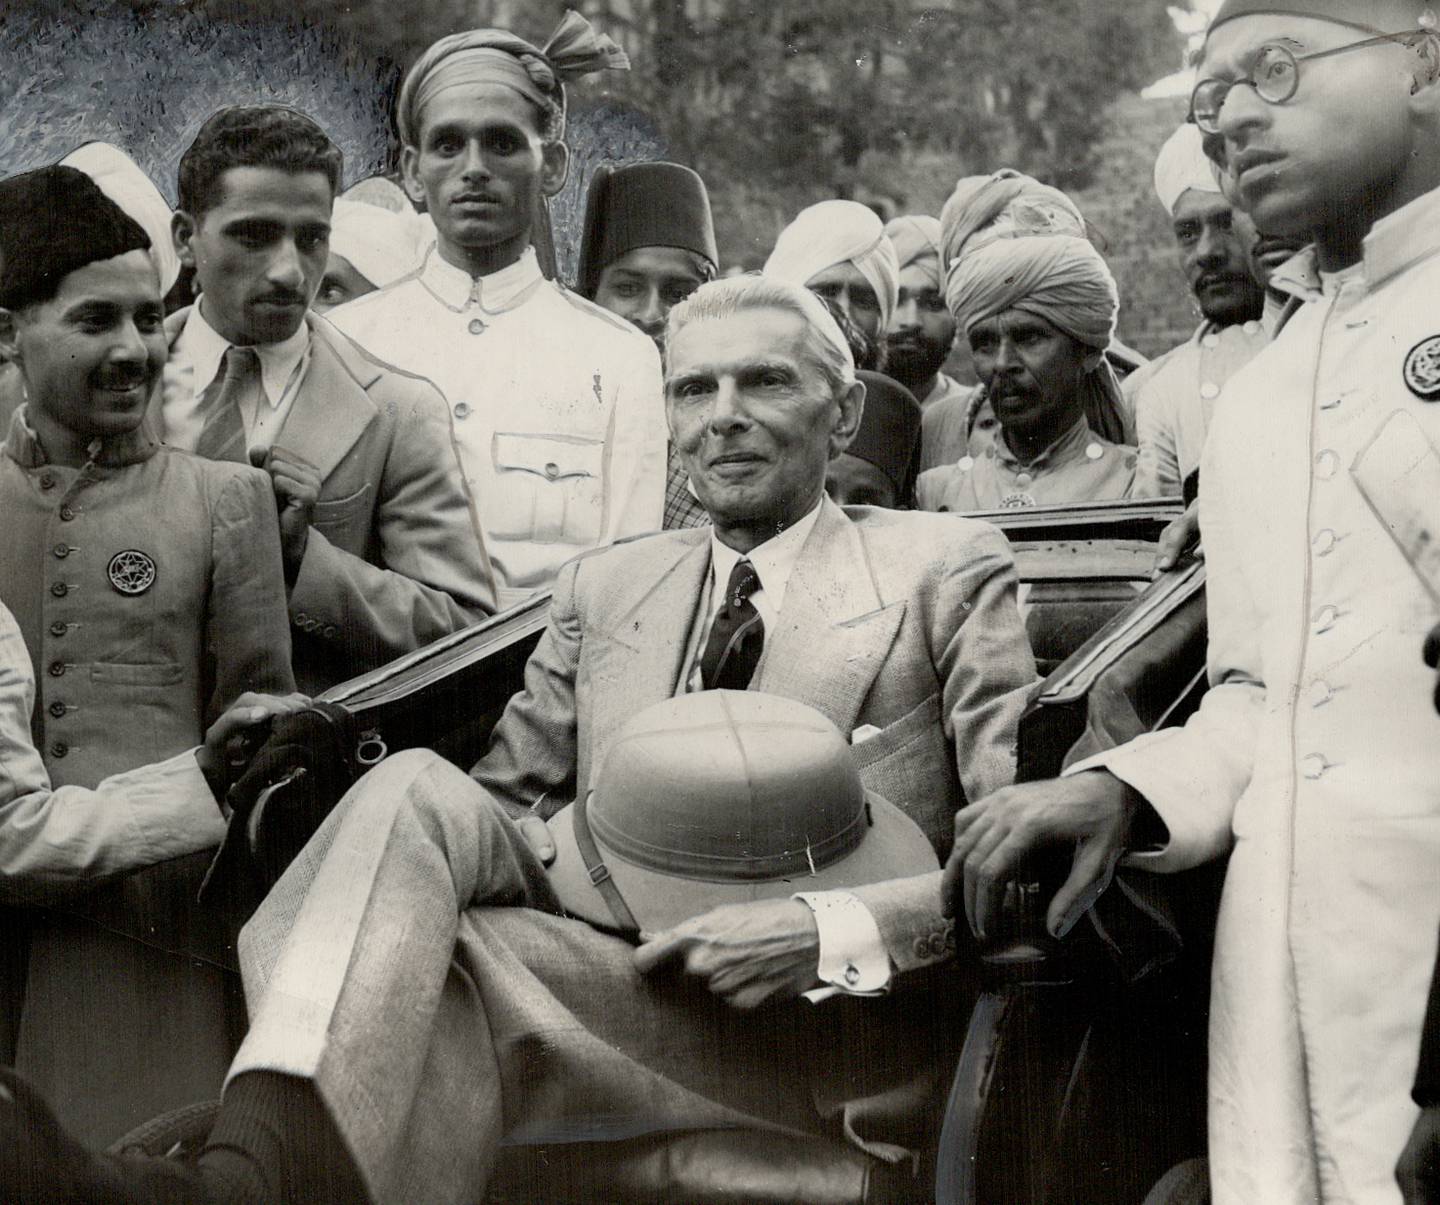 CANADA - JULY 29:  Before today's rejection of British plans for an Indian government by the powerful Moslem league; M. A. Jinnah; its president; seen here in a rickshaw surrounded by supporters; attacked the good faith of British negotiators. The British must go; he shouted.   (Photo by Toronto Star Archives/Toronto Star via Getty Images)